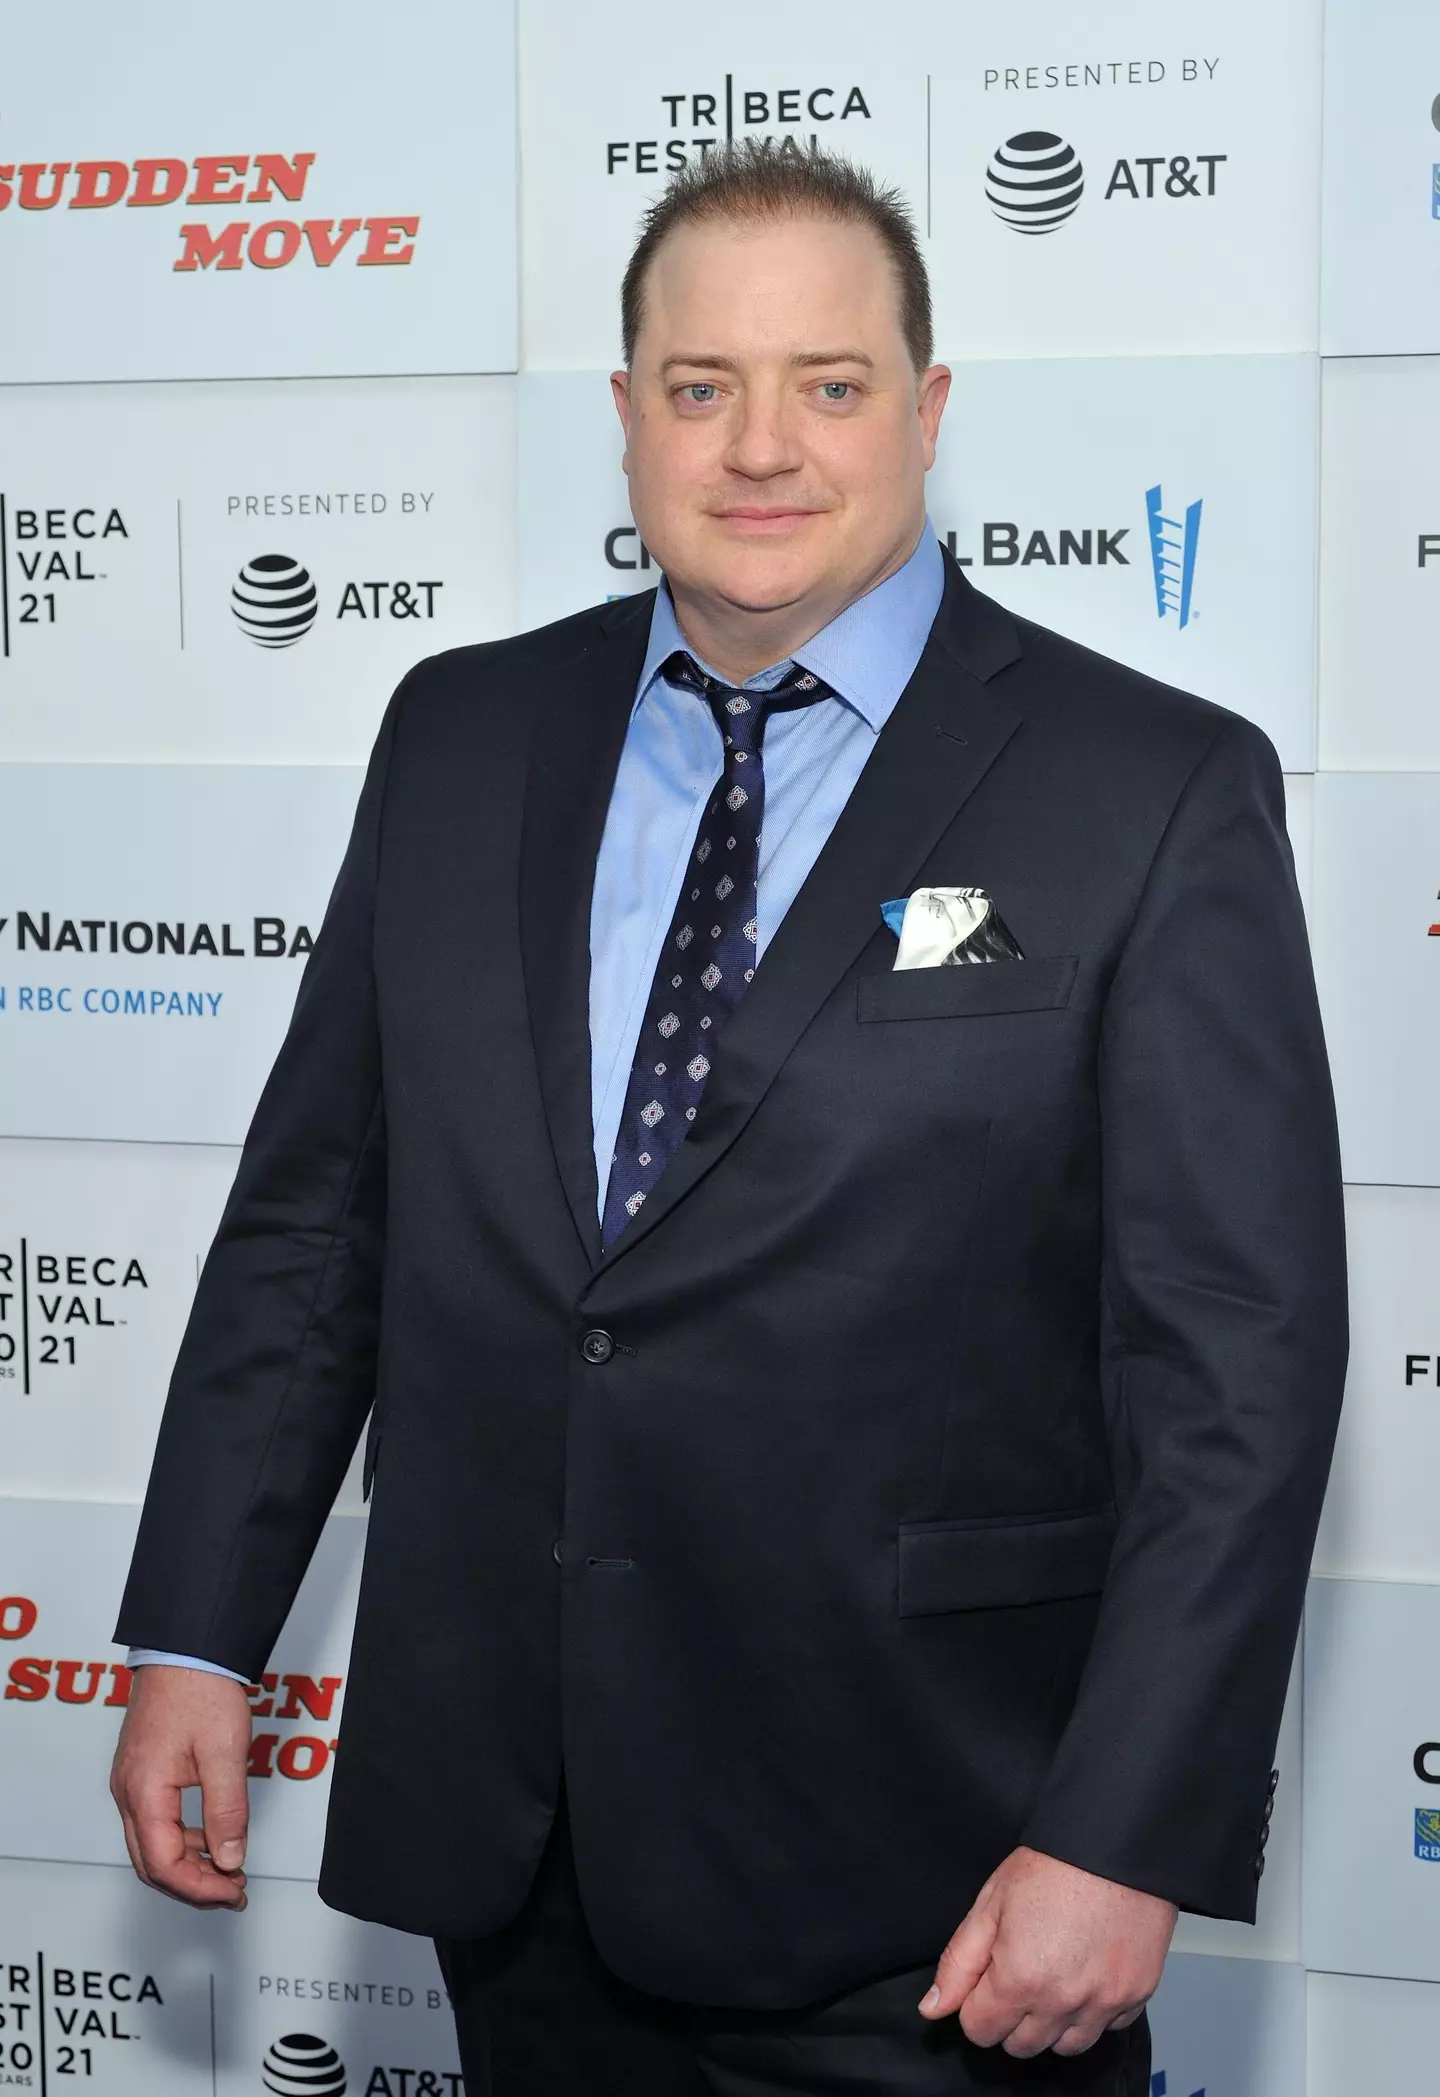 Brendan Fraser at the world premiere of No Sudden Move at the Tribeca Festival 2021.